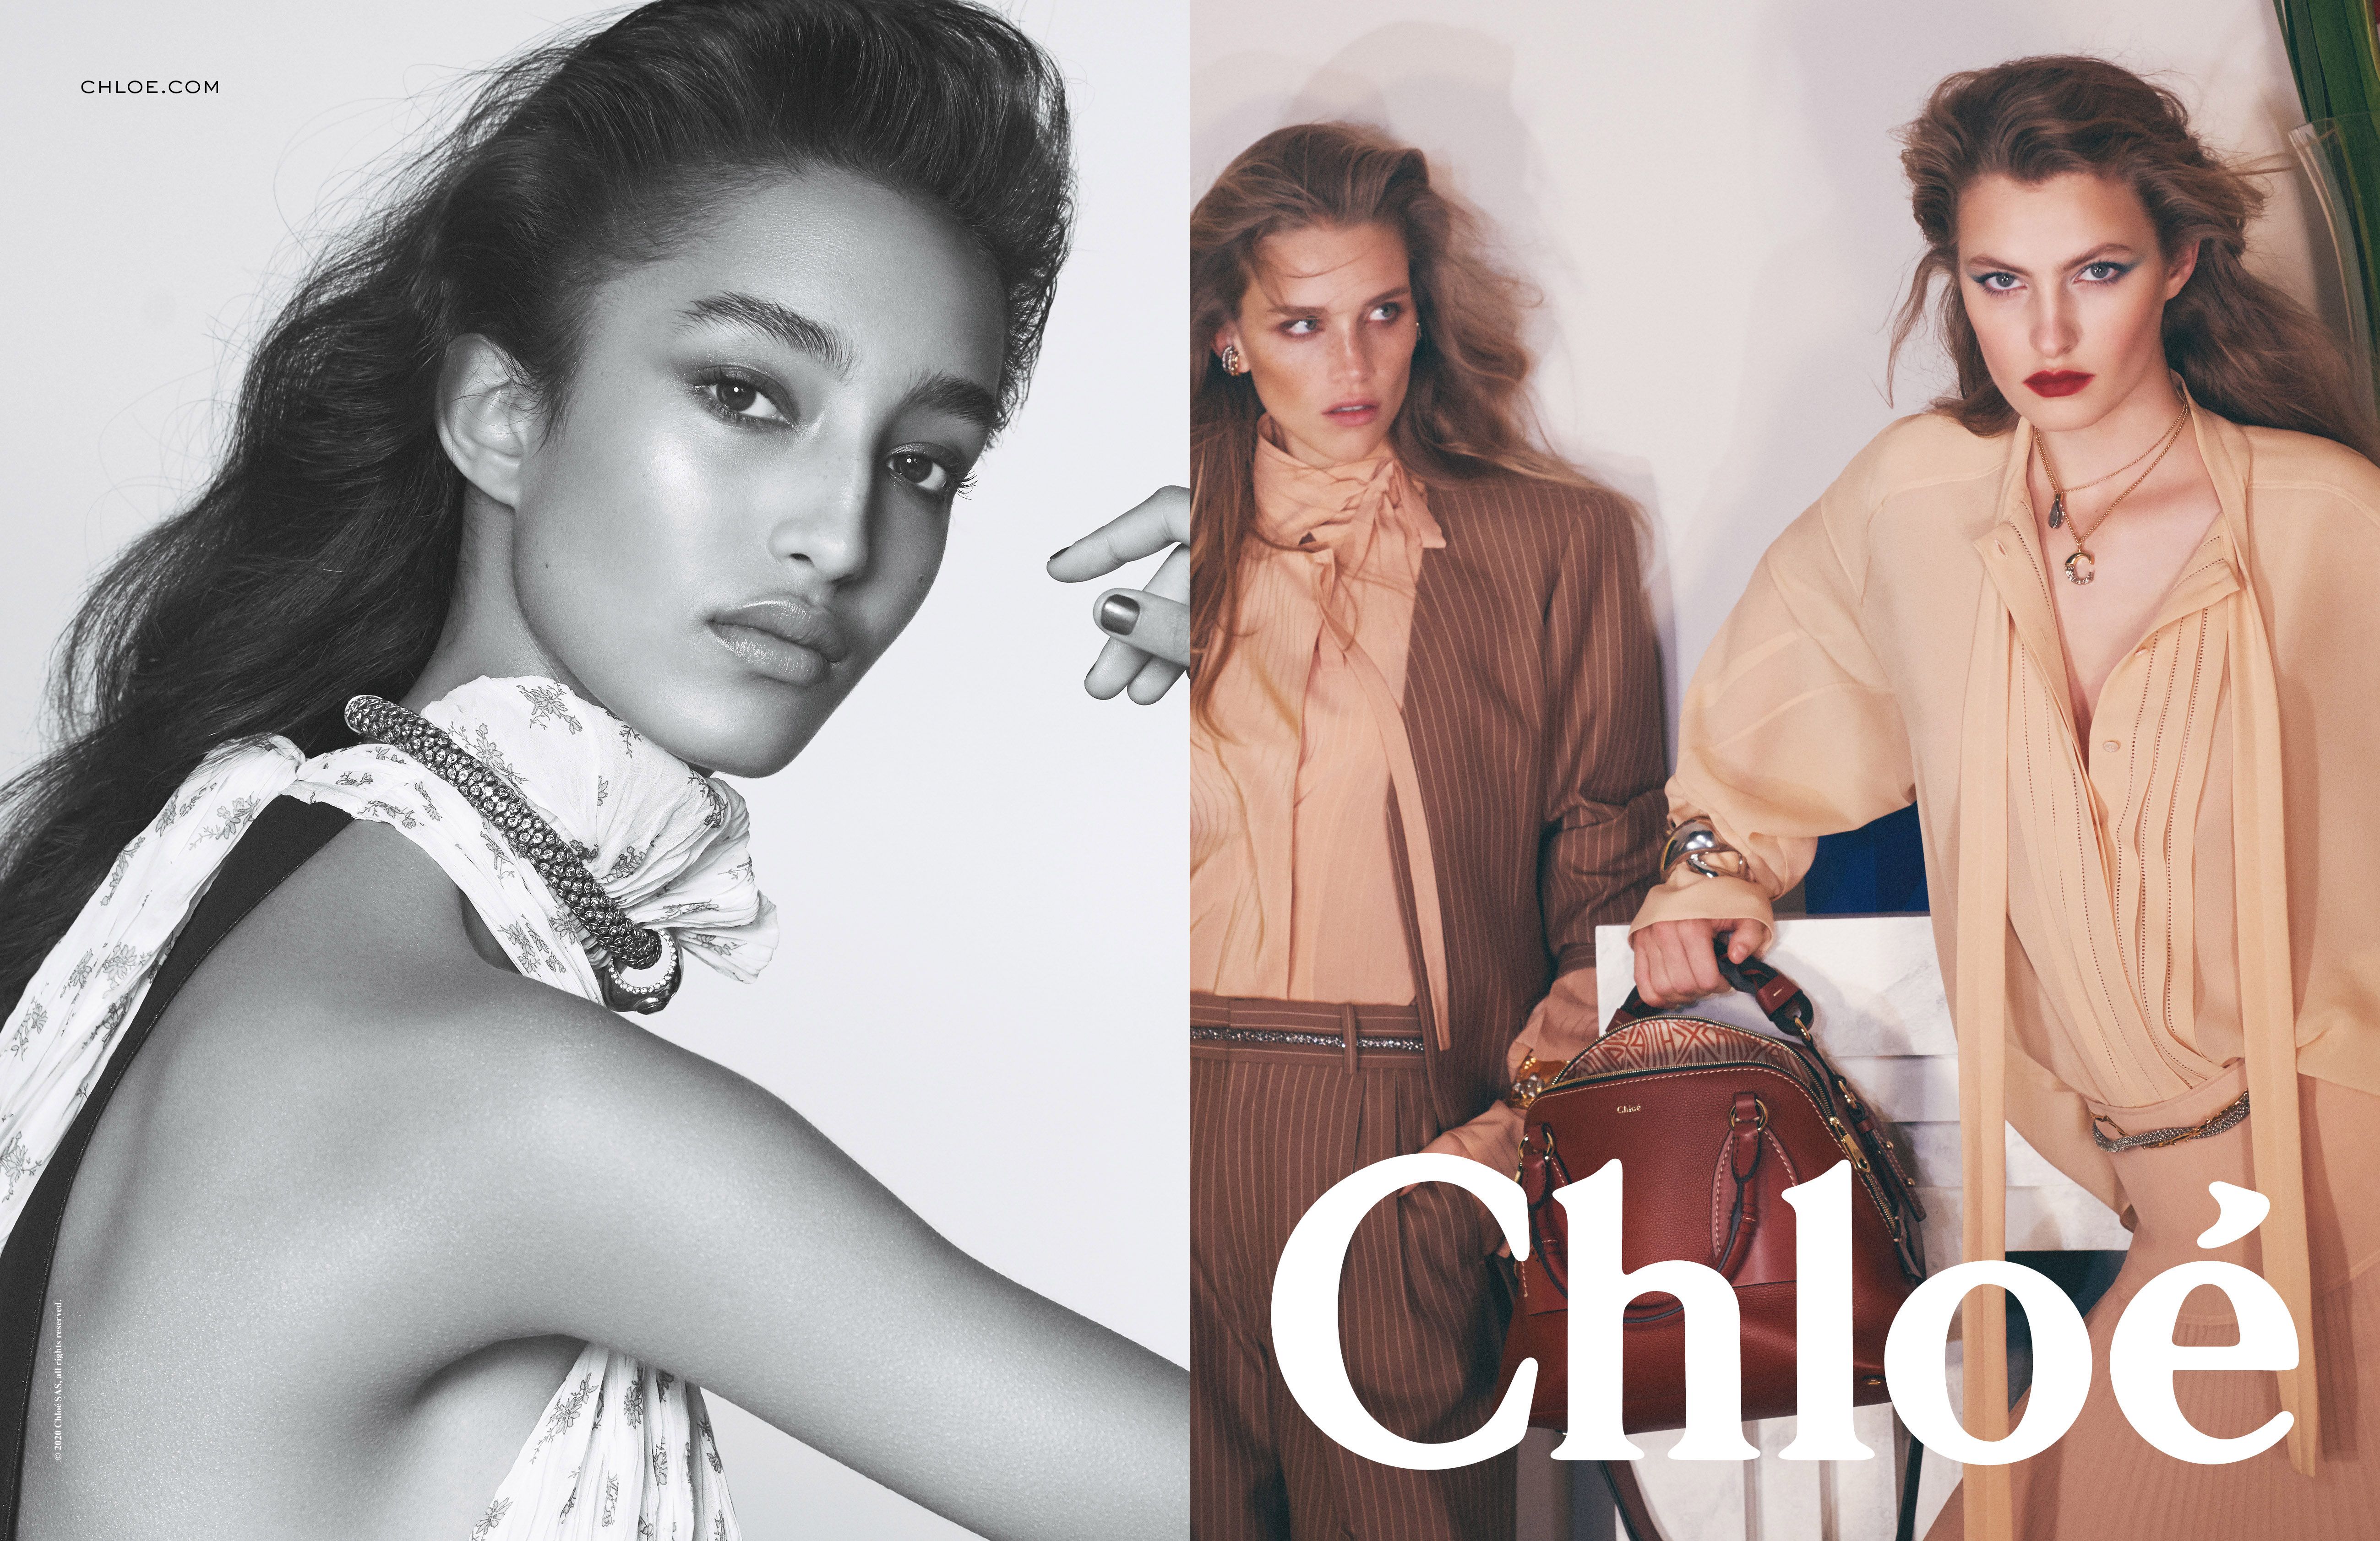 The Best Fashion Campaigns of the Year So Far